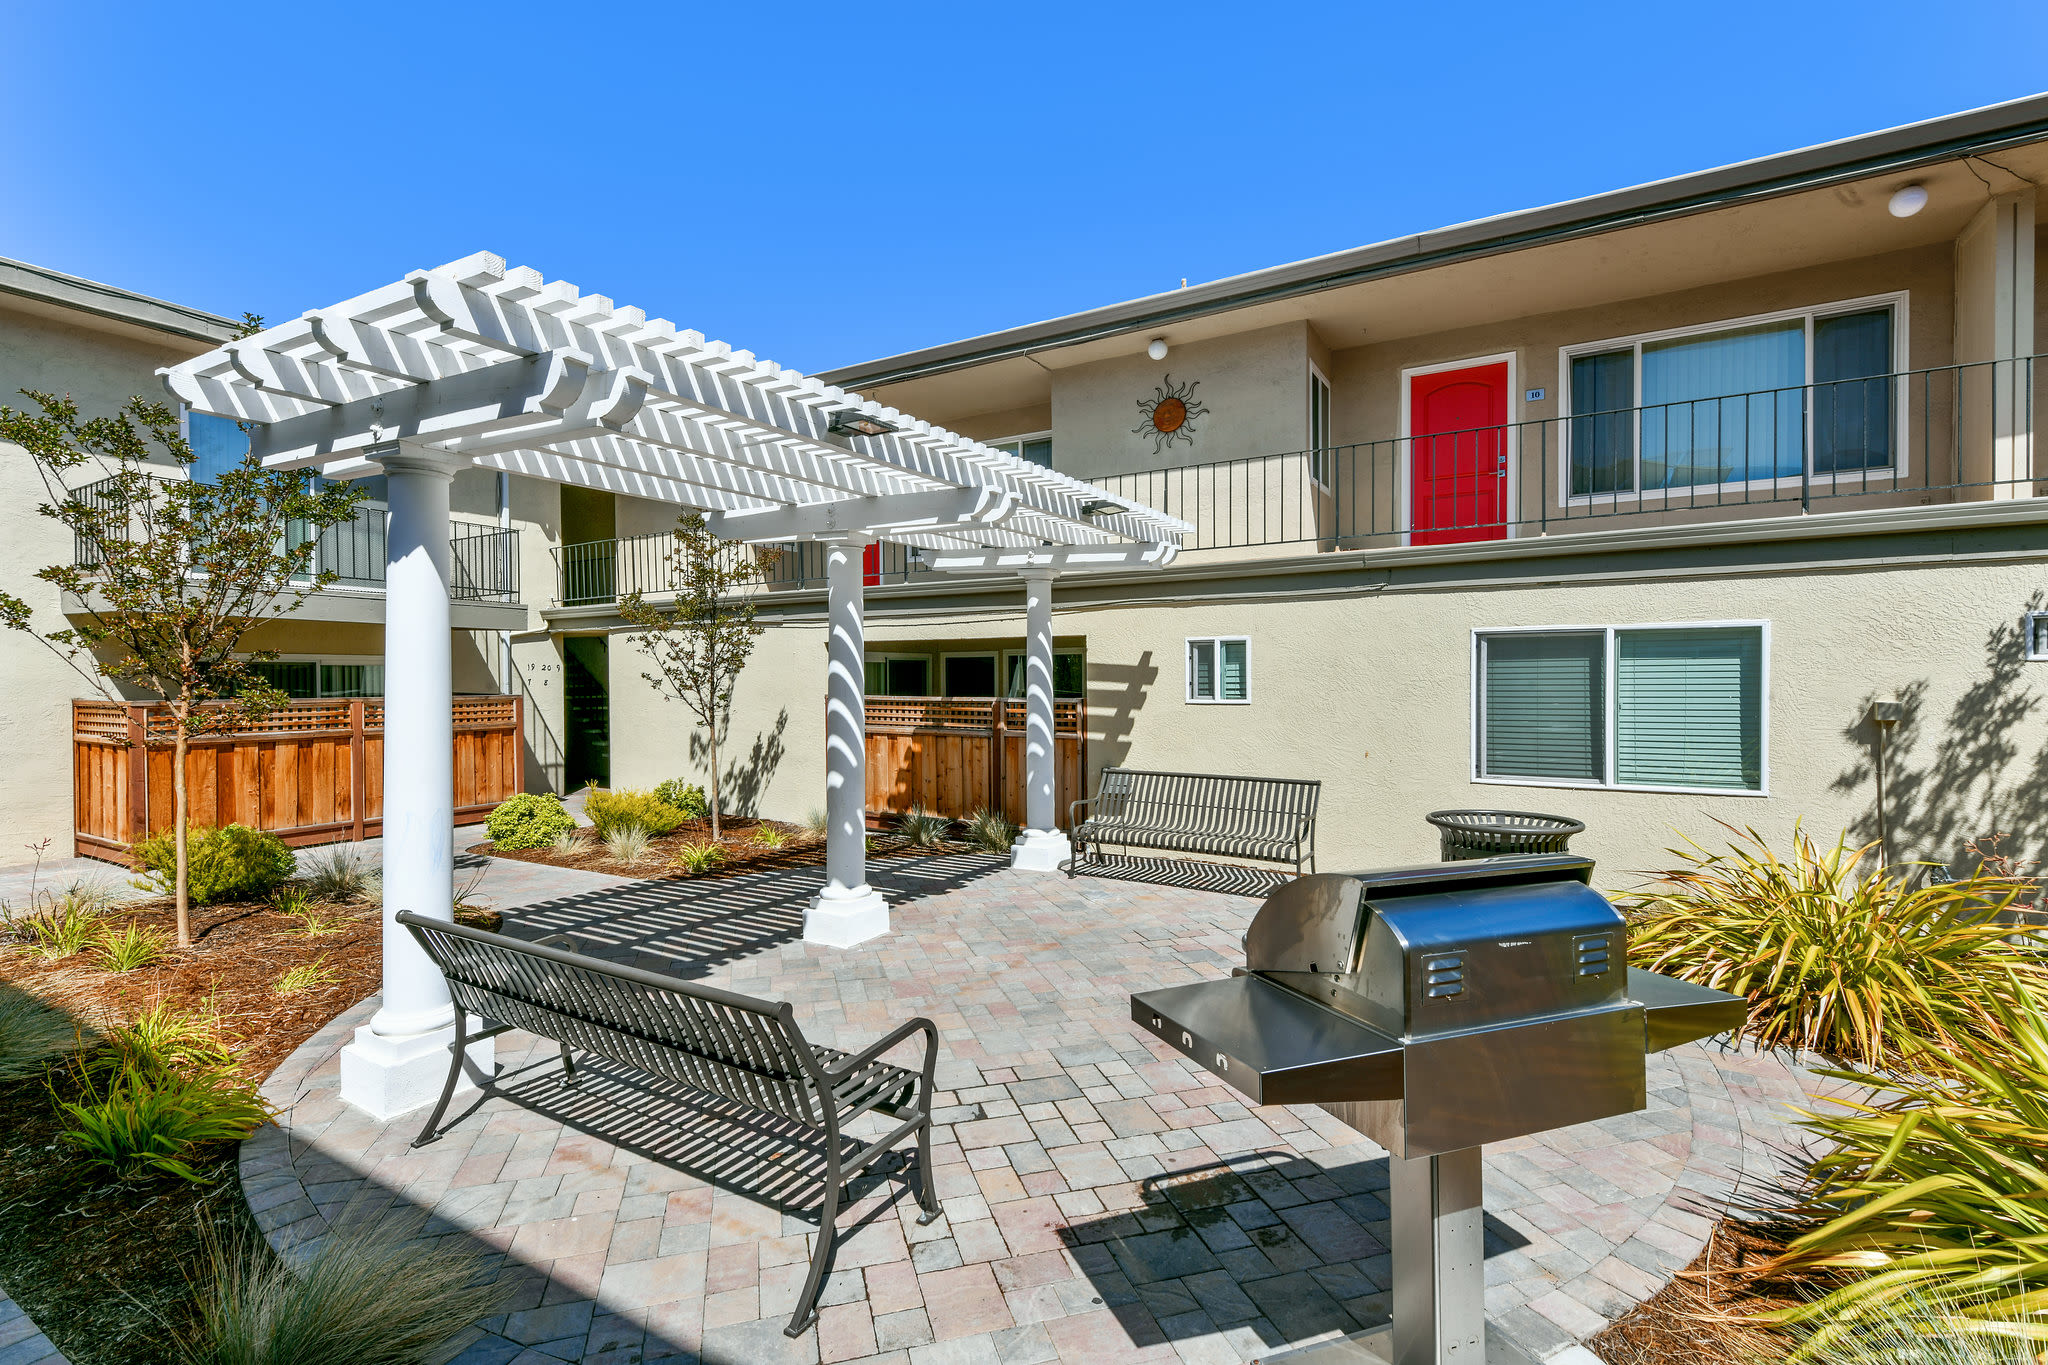 Outdoor grill and picnic area with benches at Marina Haven Apartments in San Leandro, California